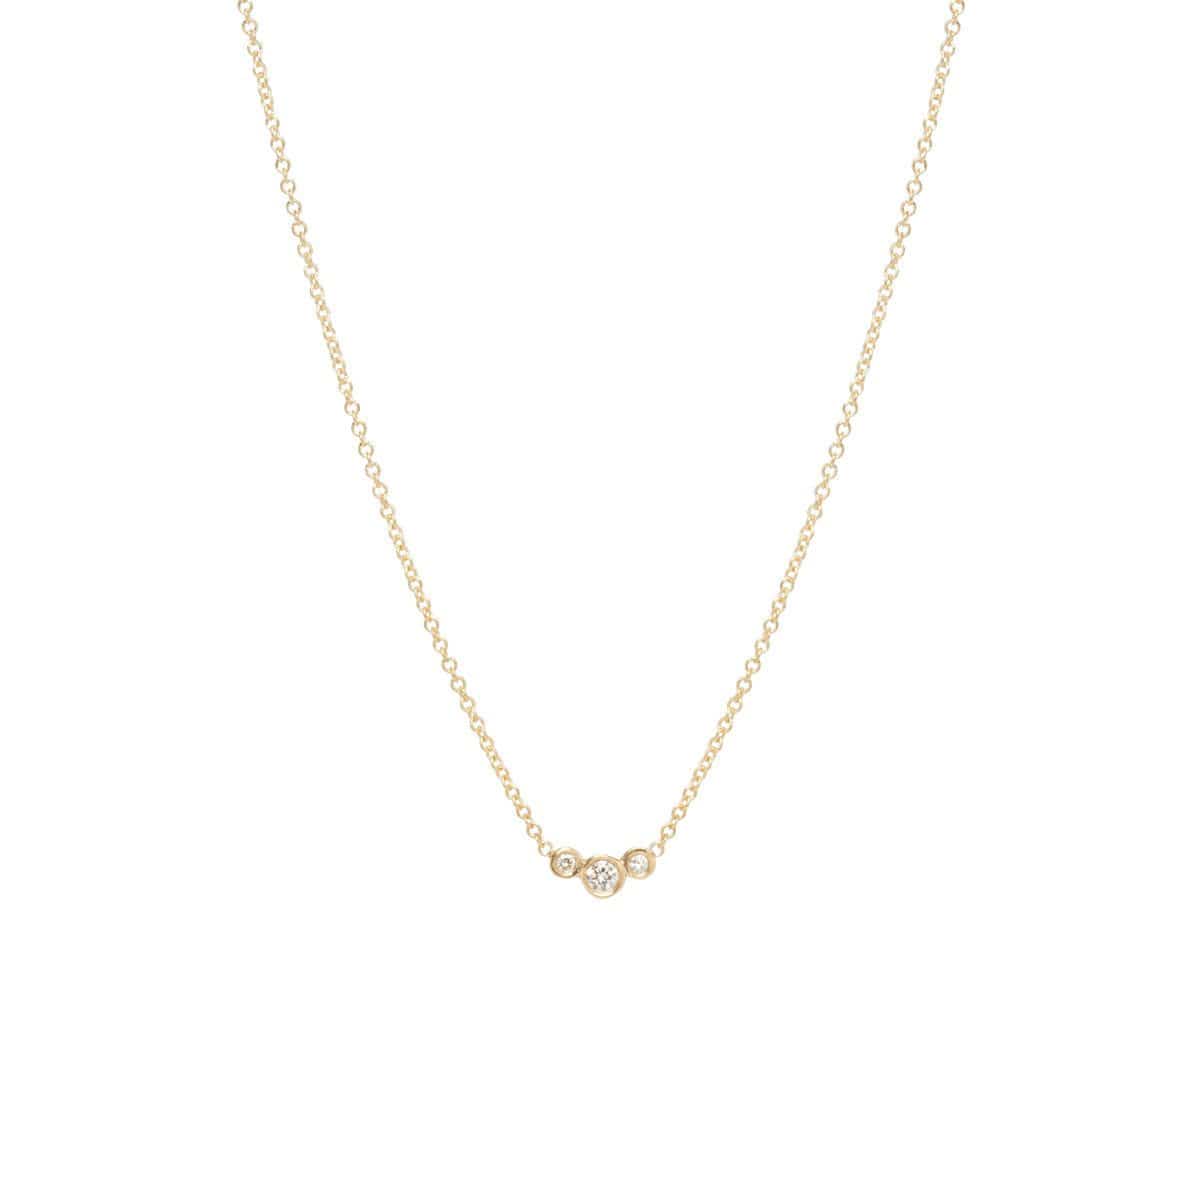 Load image into Gallery viewer, NKL-DIA 14k Small Graduated Bezel Diamond Necklace
